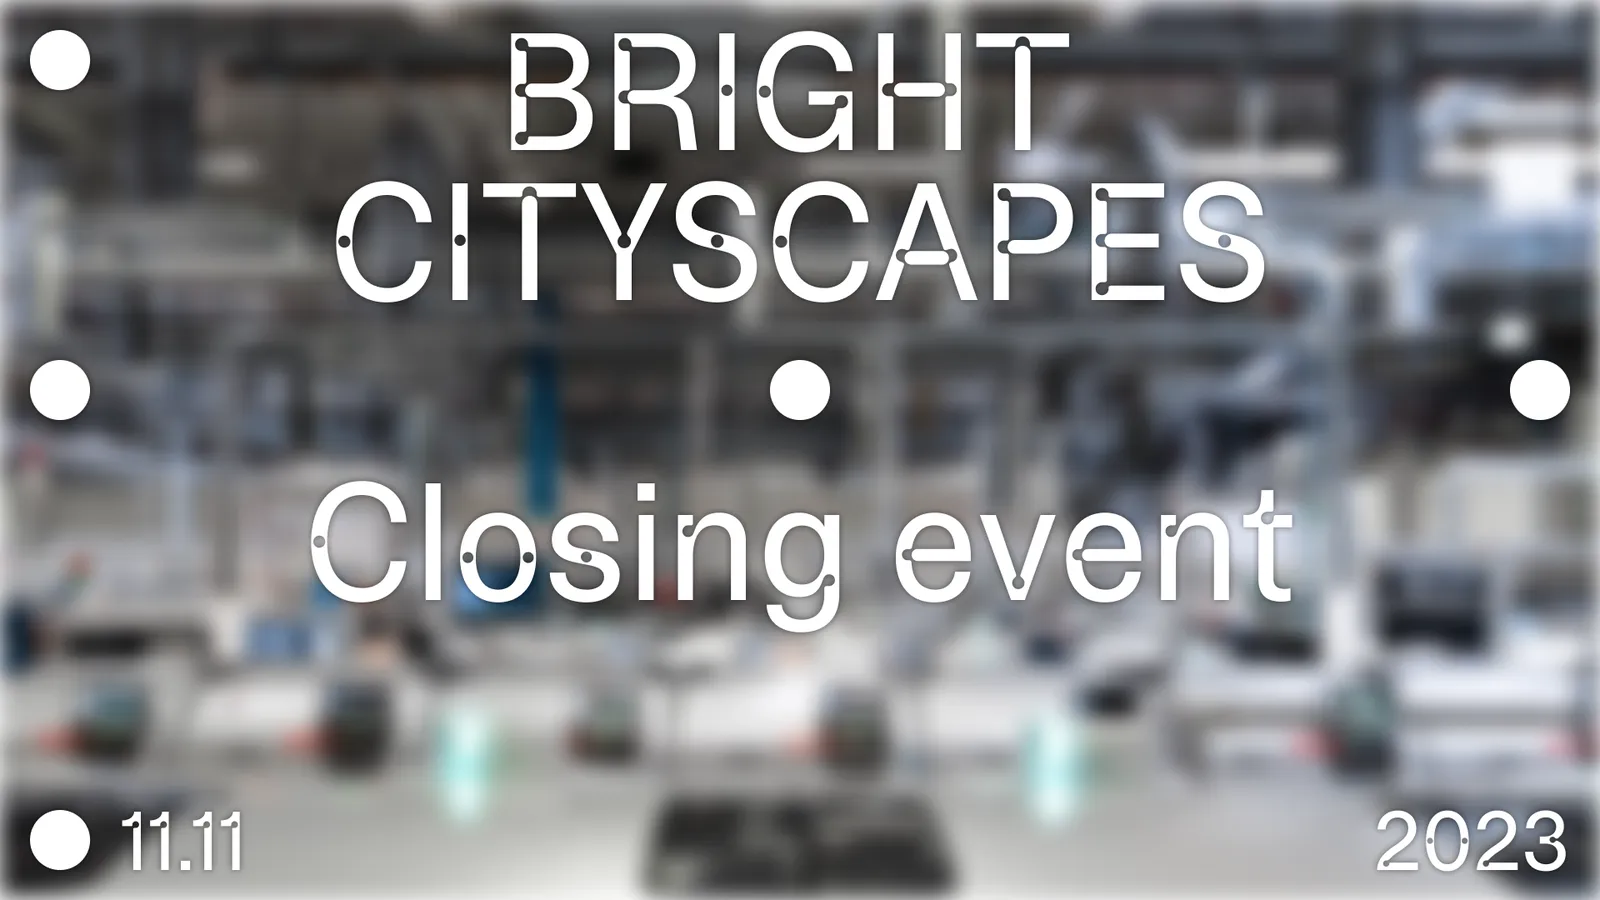 Bright Cityscapes publication launch and closing